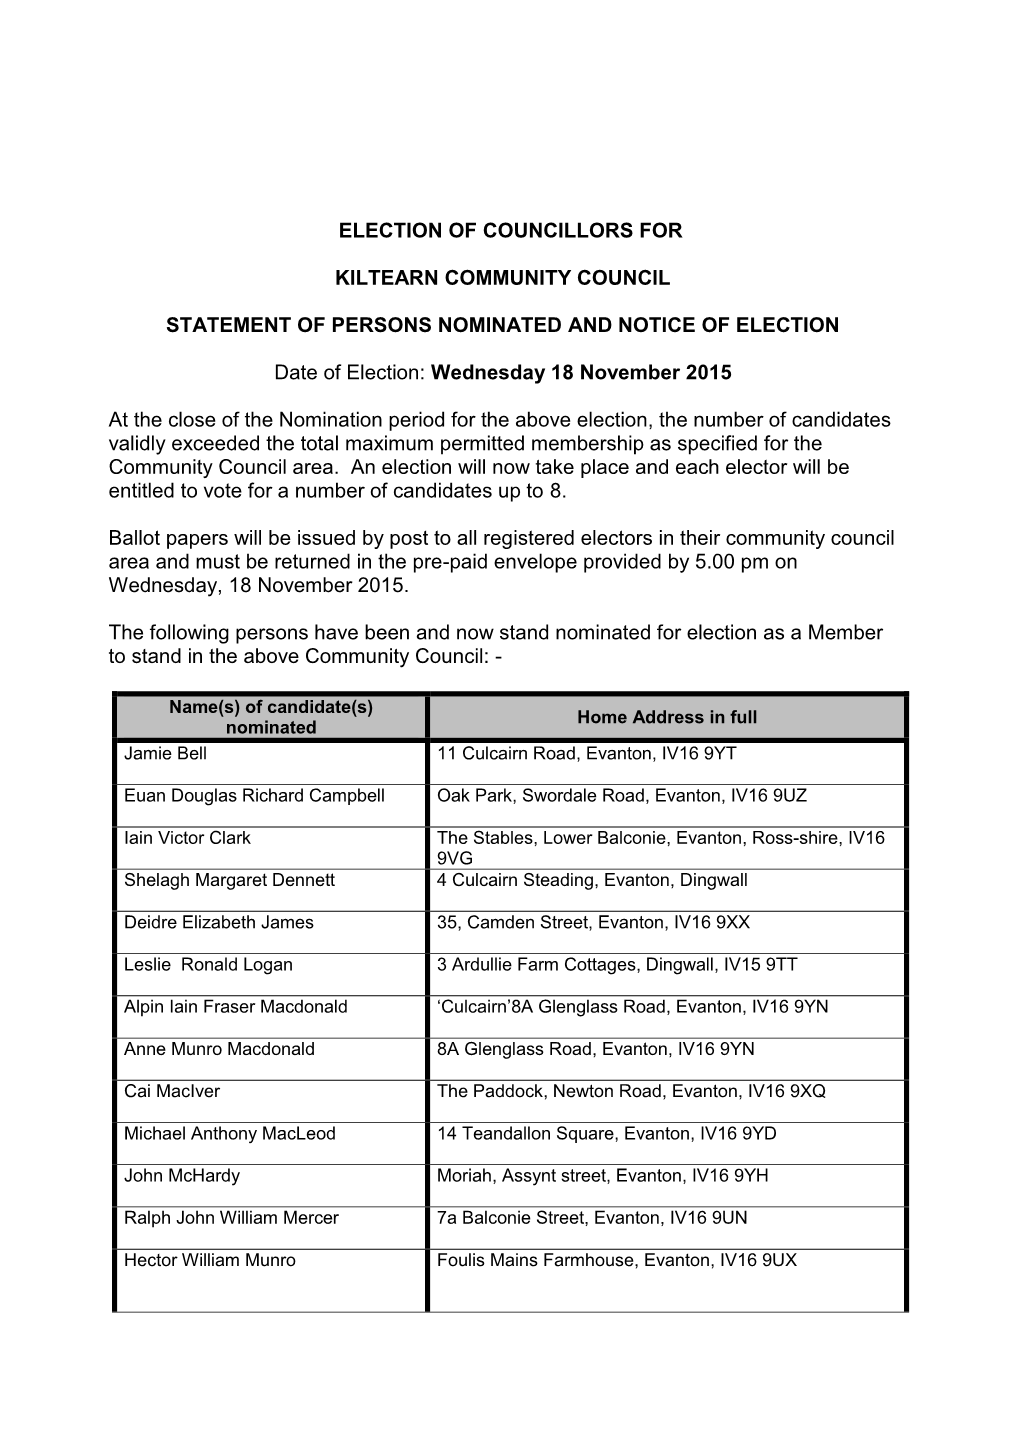 Election of Councillors for Kiltearn